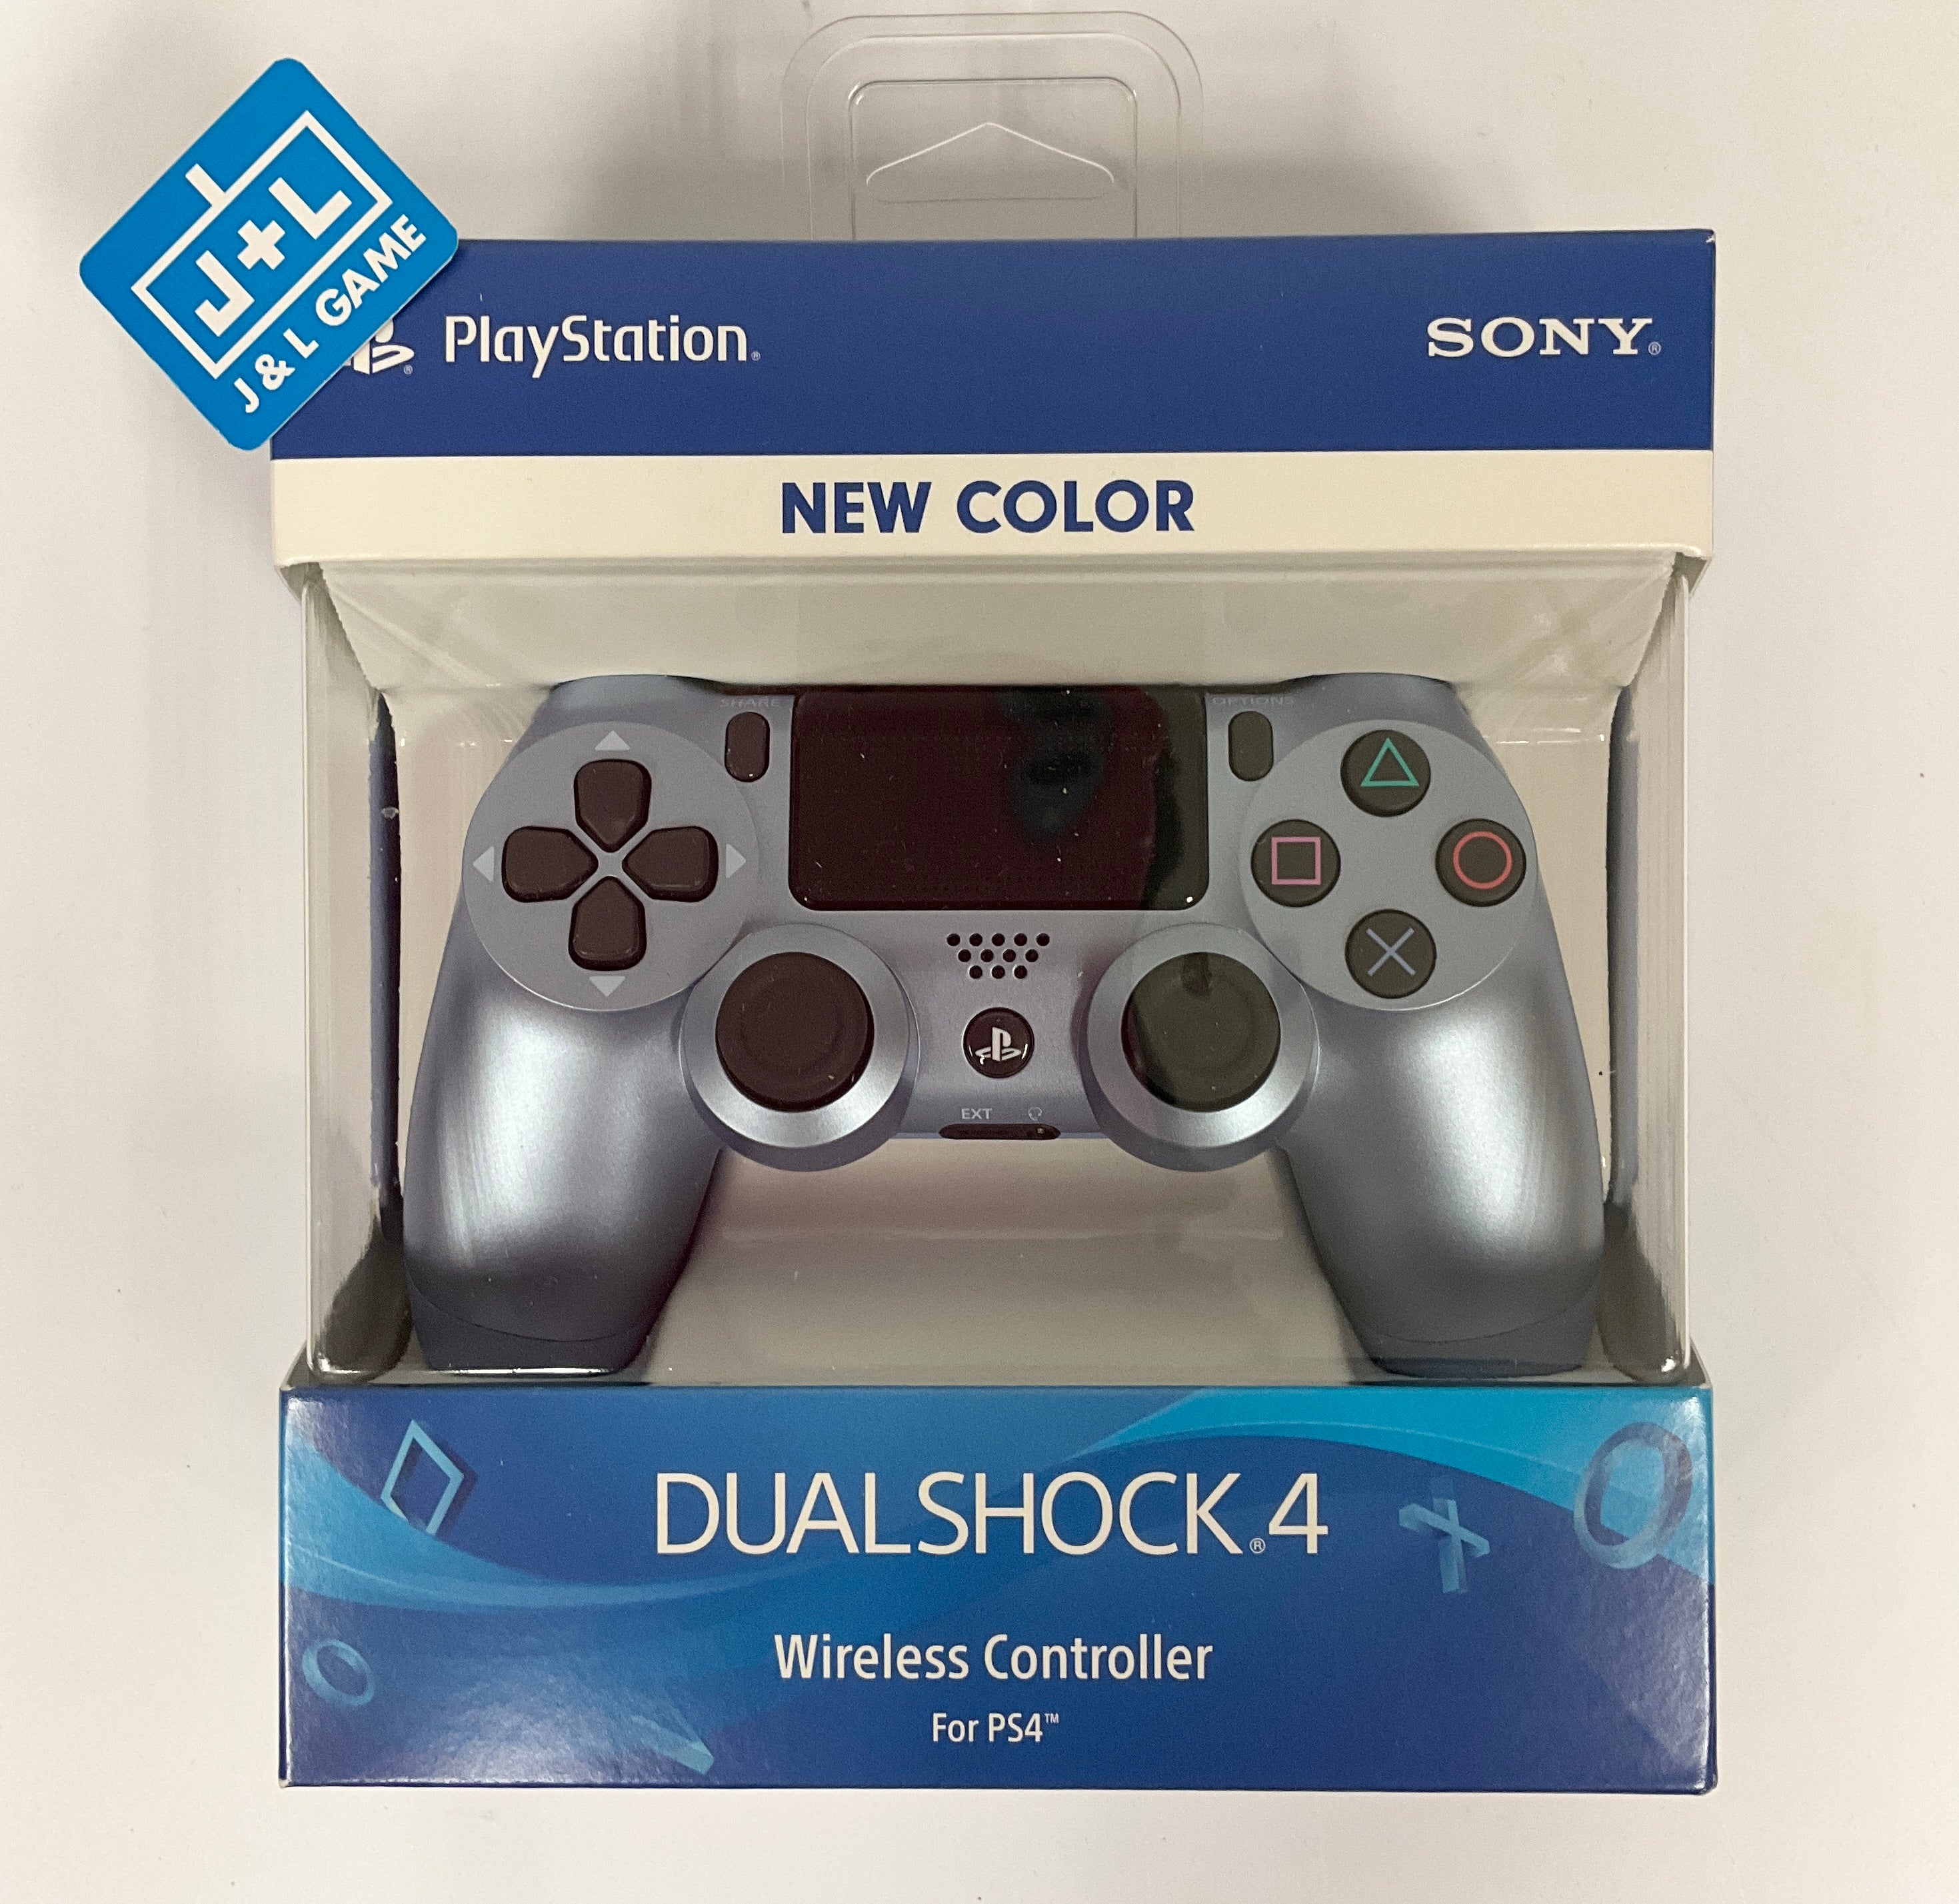 Sony DualShock 4 Wireless Controller (Titanium Blue) - (PS4) PlayStation 4 Accessories Sony Interactive Entertainment LLC   